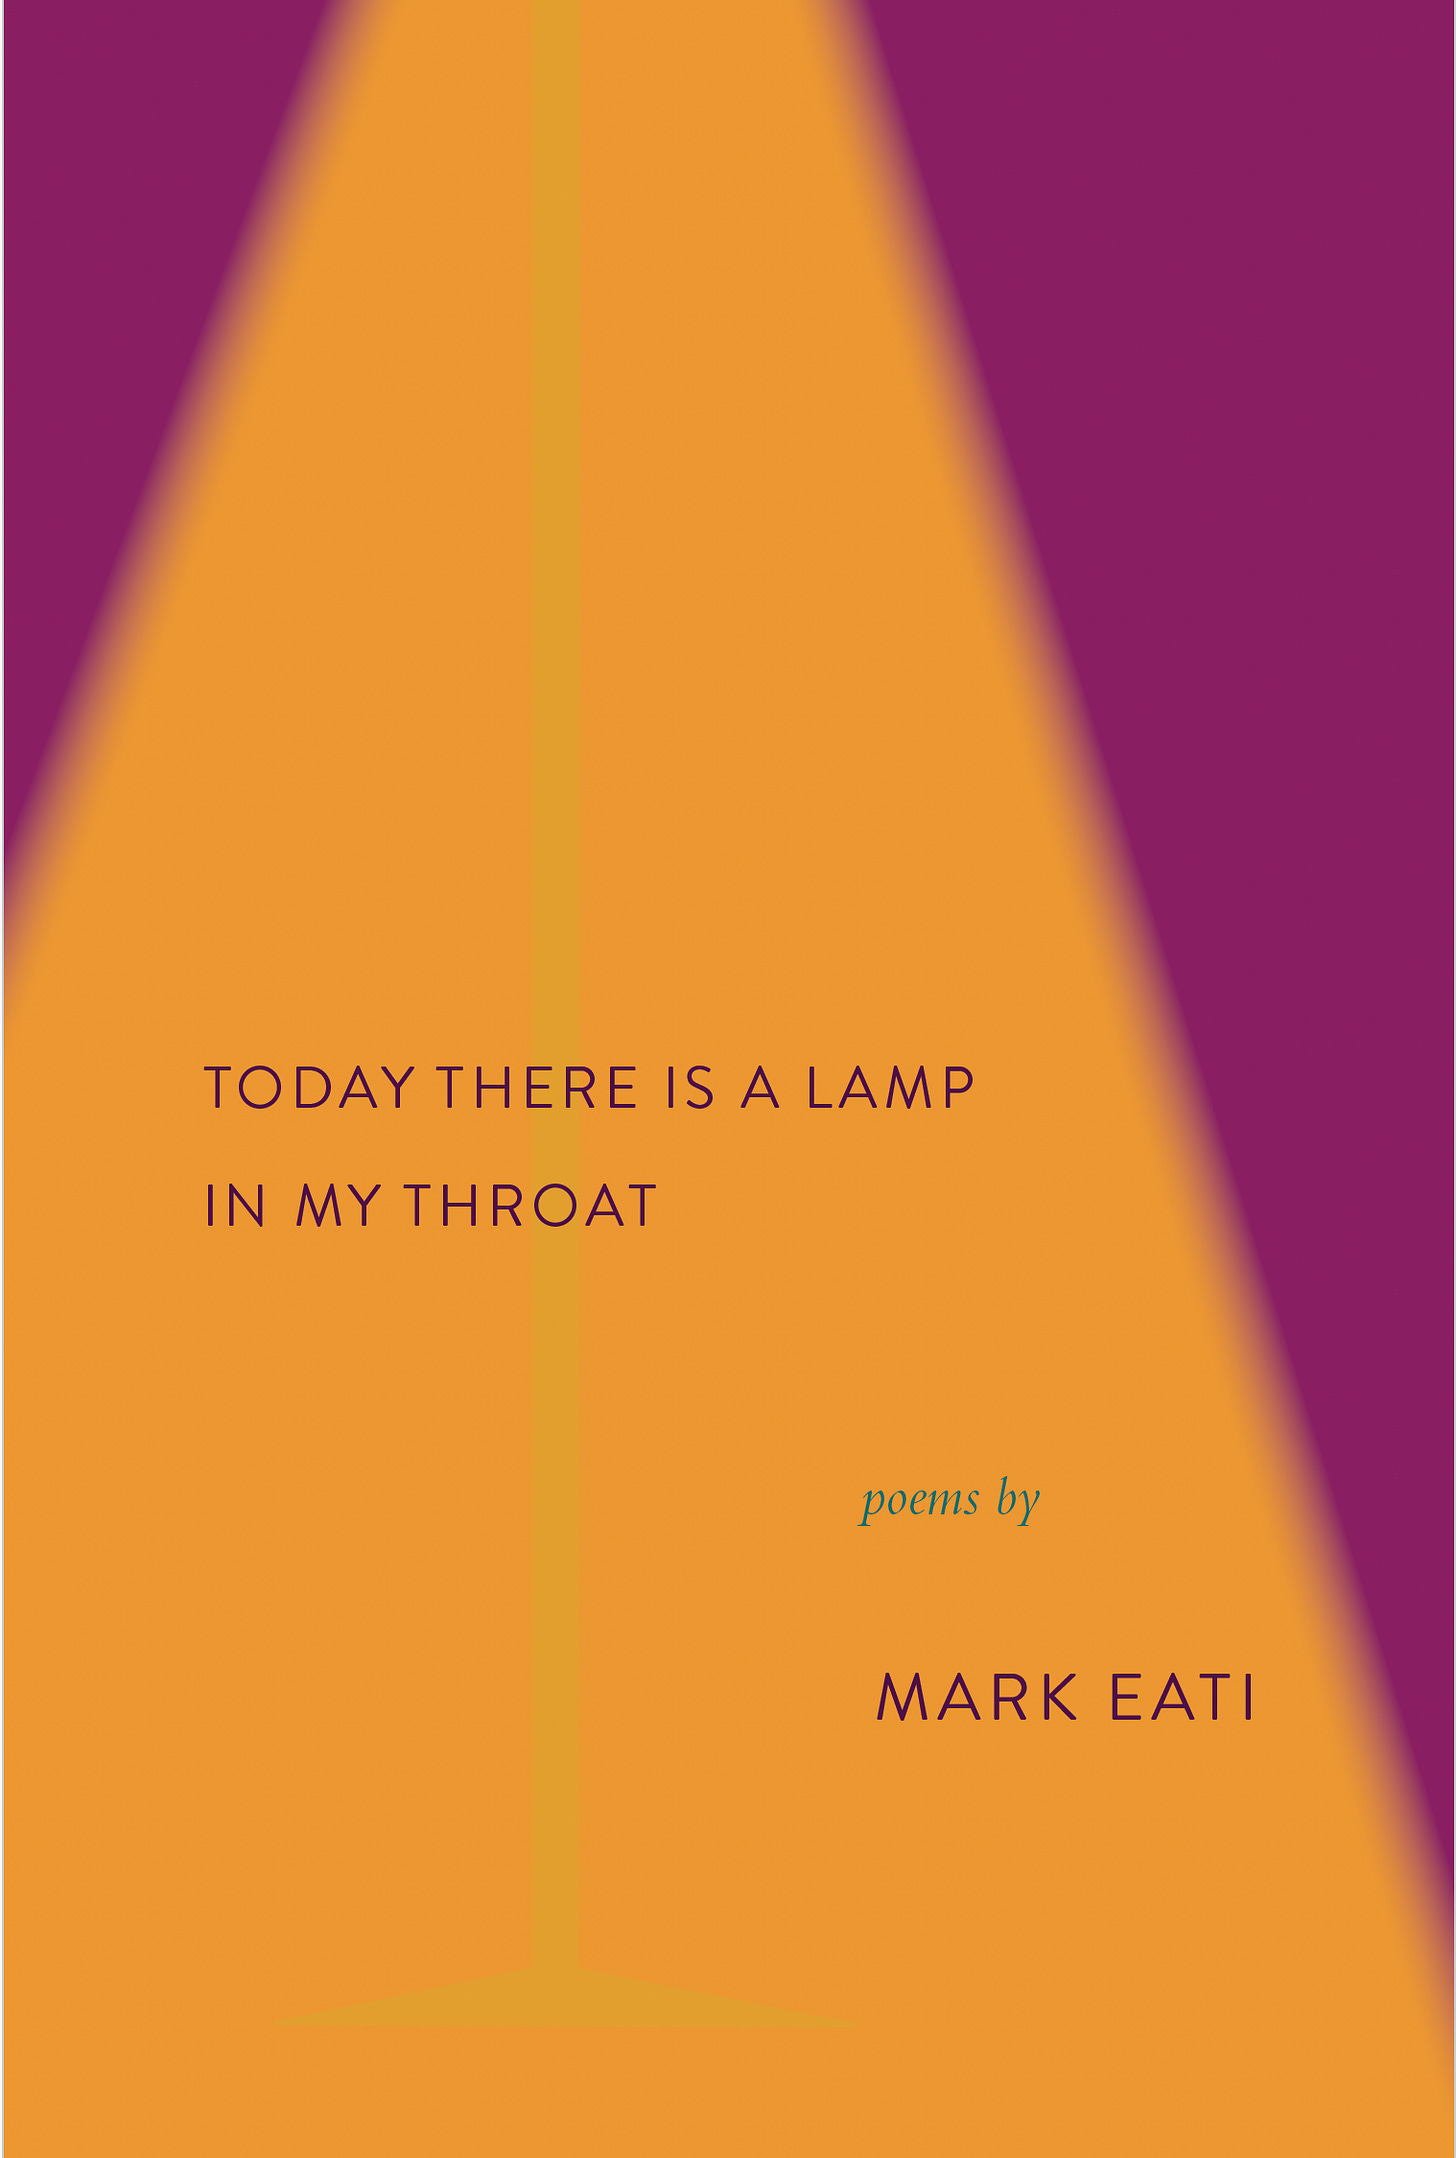 Today There Is a Lamp in My Throat poem by Mark Eati